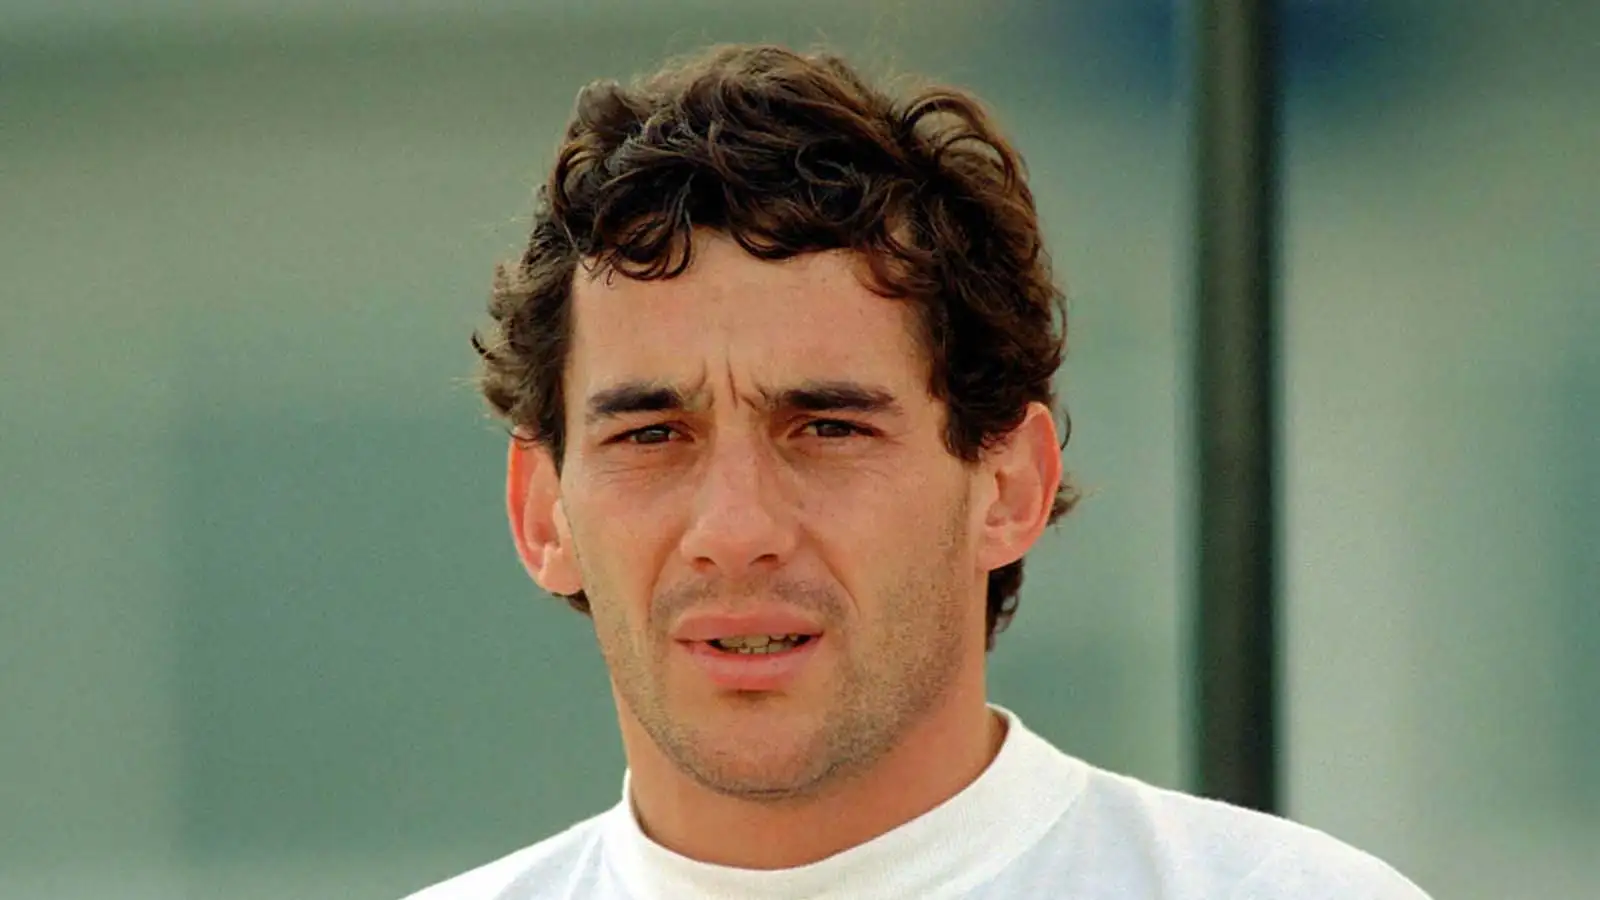 Ayrton Senna: Seven things you may not know about a Formula 1 legend :  PlanetF1